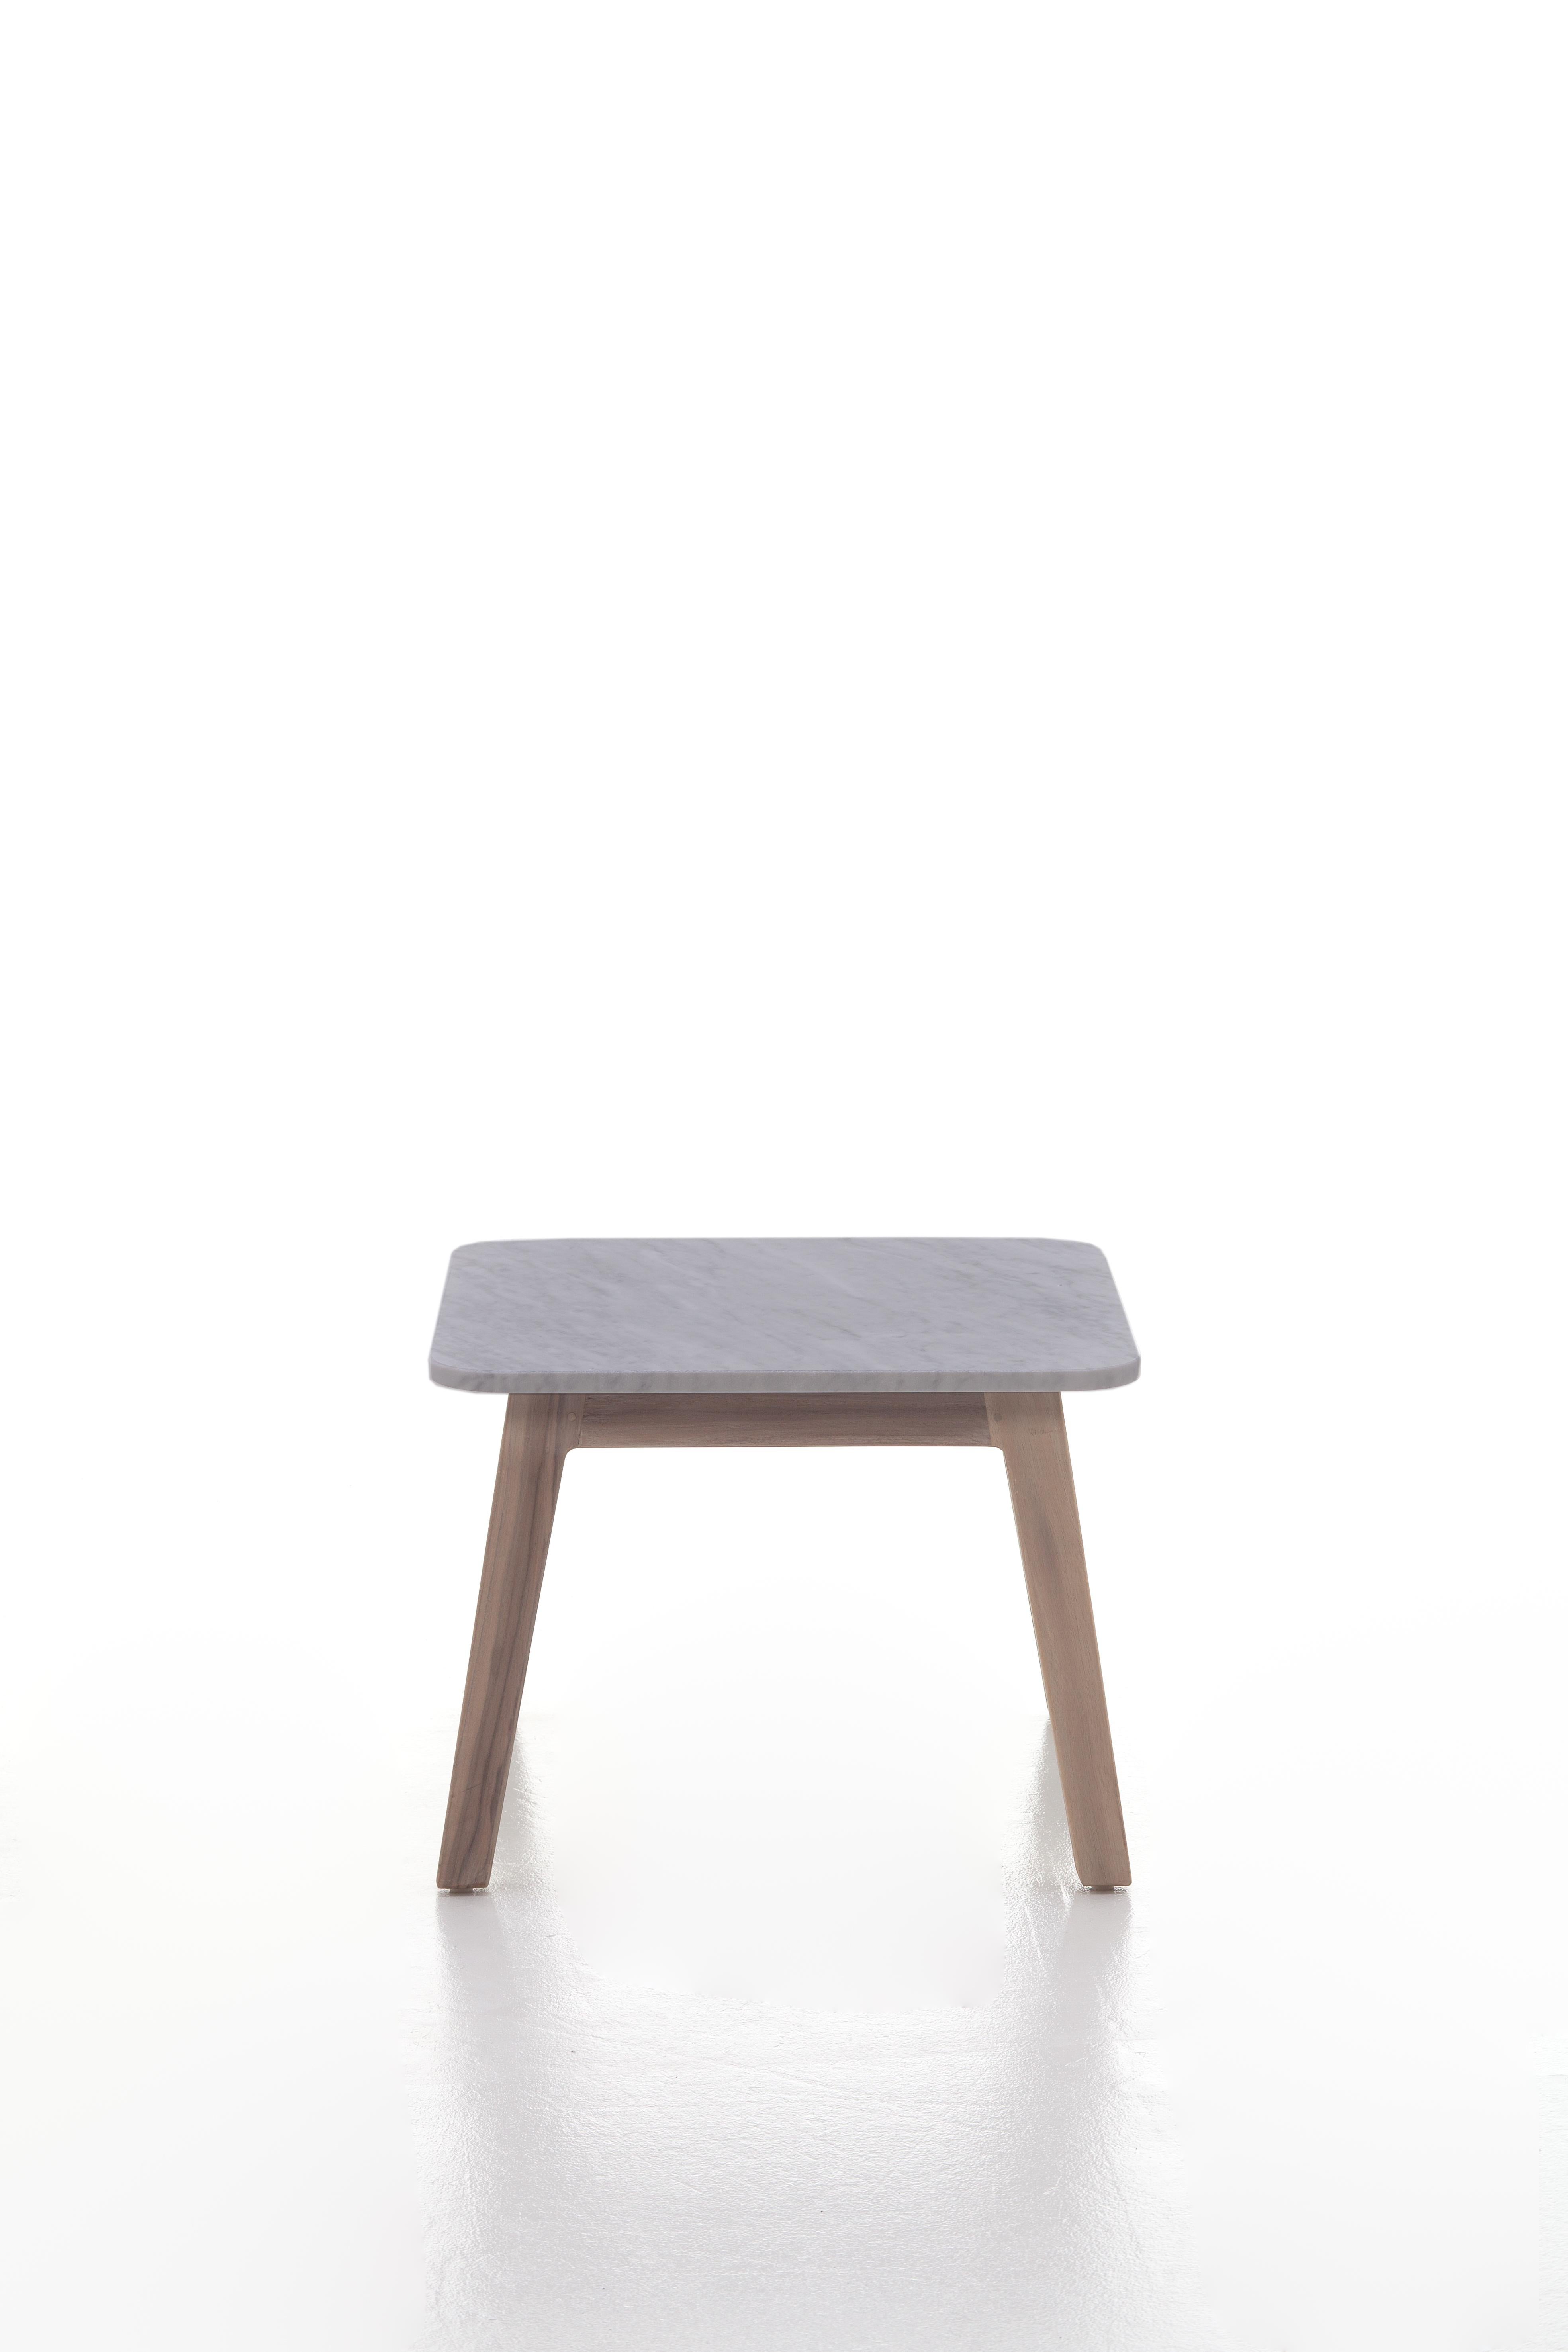 Family of coffee tables available with rectangular or square top, Inout 867/868 express a refined Nordic minimalism. Four-legged coffee tables, they have a base in Washed Teak, one of the finest tropical woods subjected to ageing treatment that